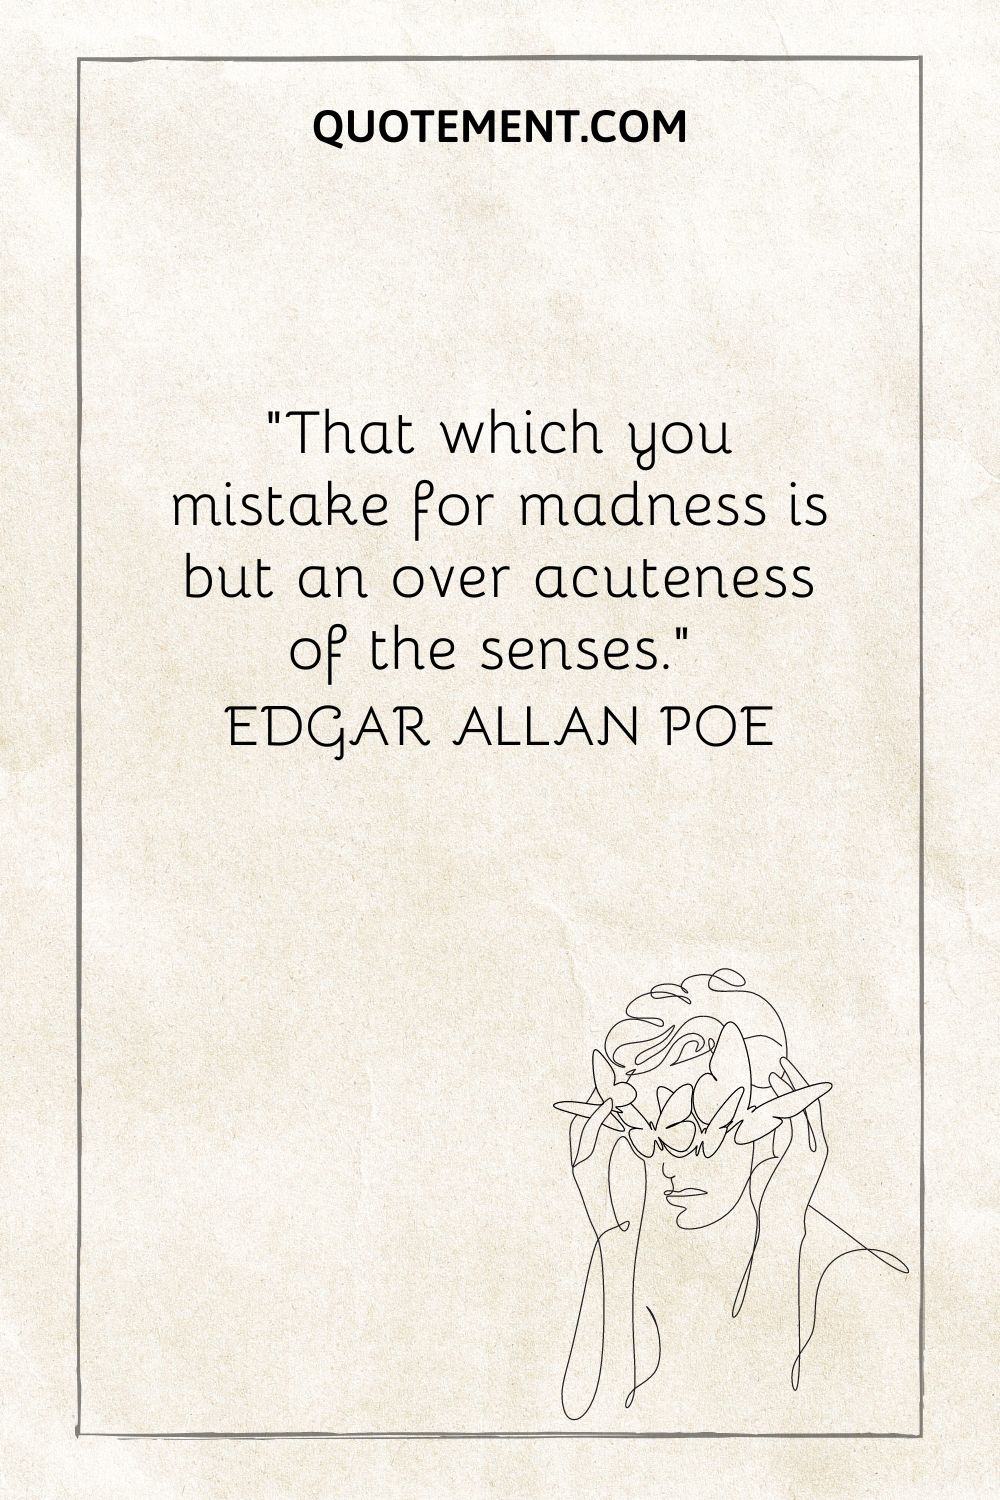 “That which you mistake for madness is but an over acuteness of the senses.” — Edgar Allan Poe